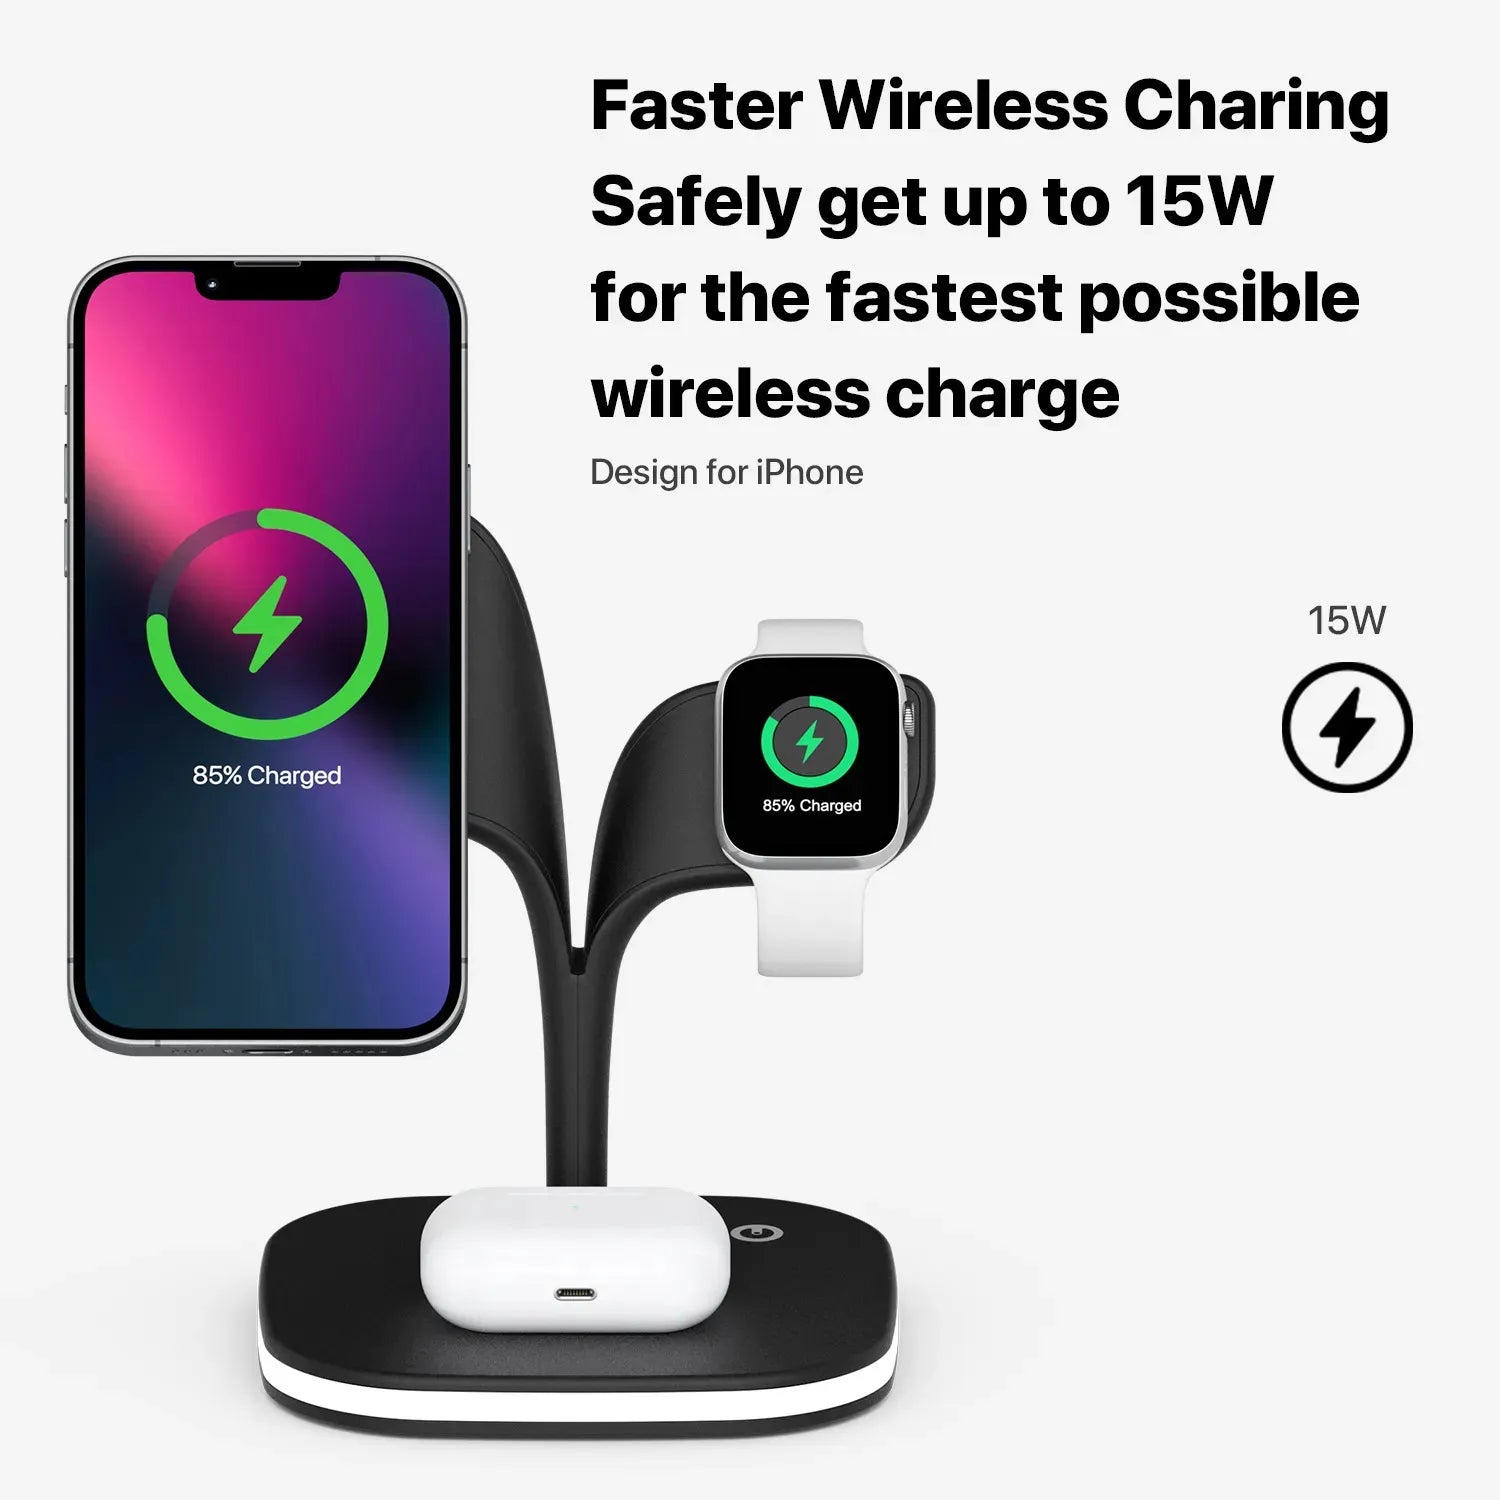 Faster Wireless Charing Safely get up to 15W for the fastest possible wireless charge